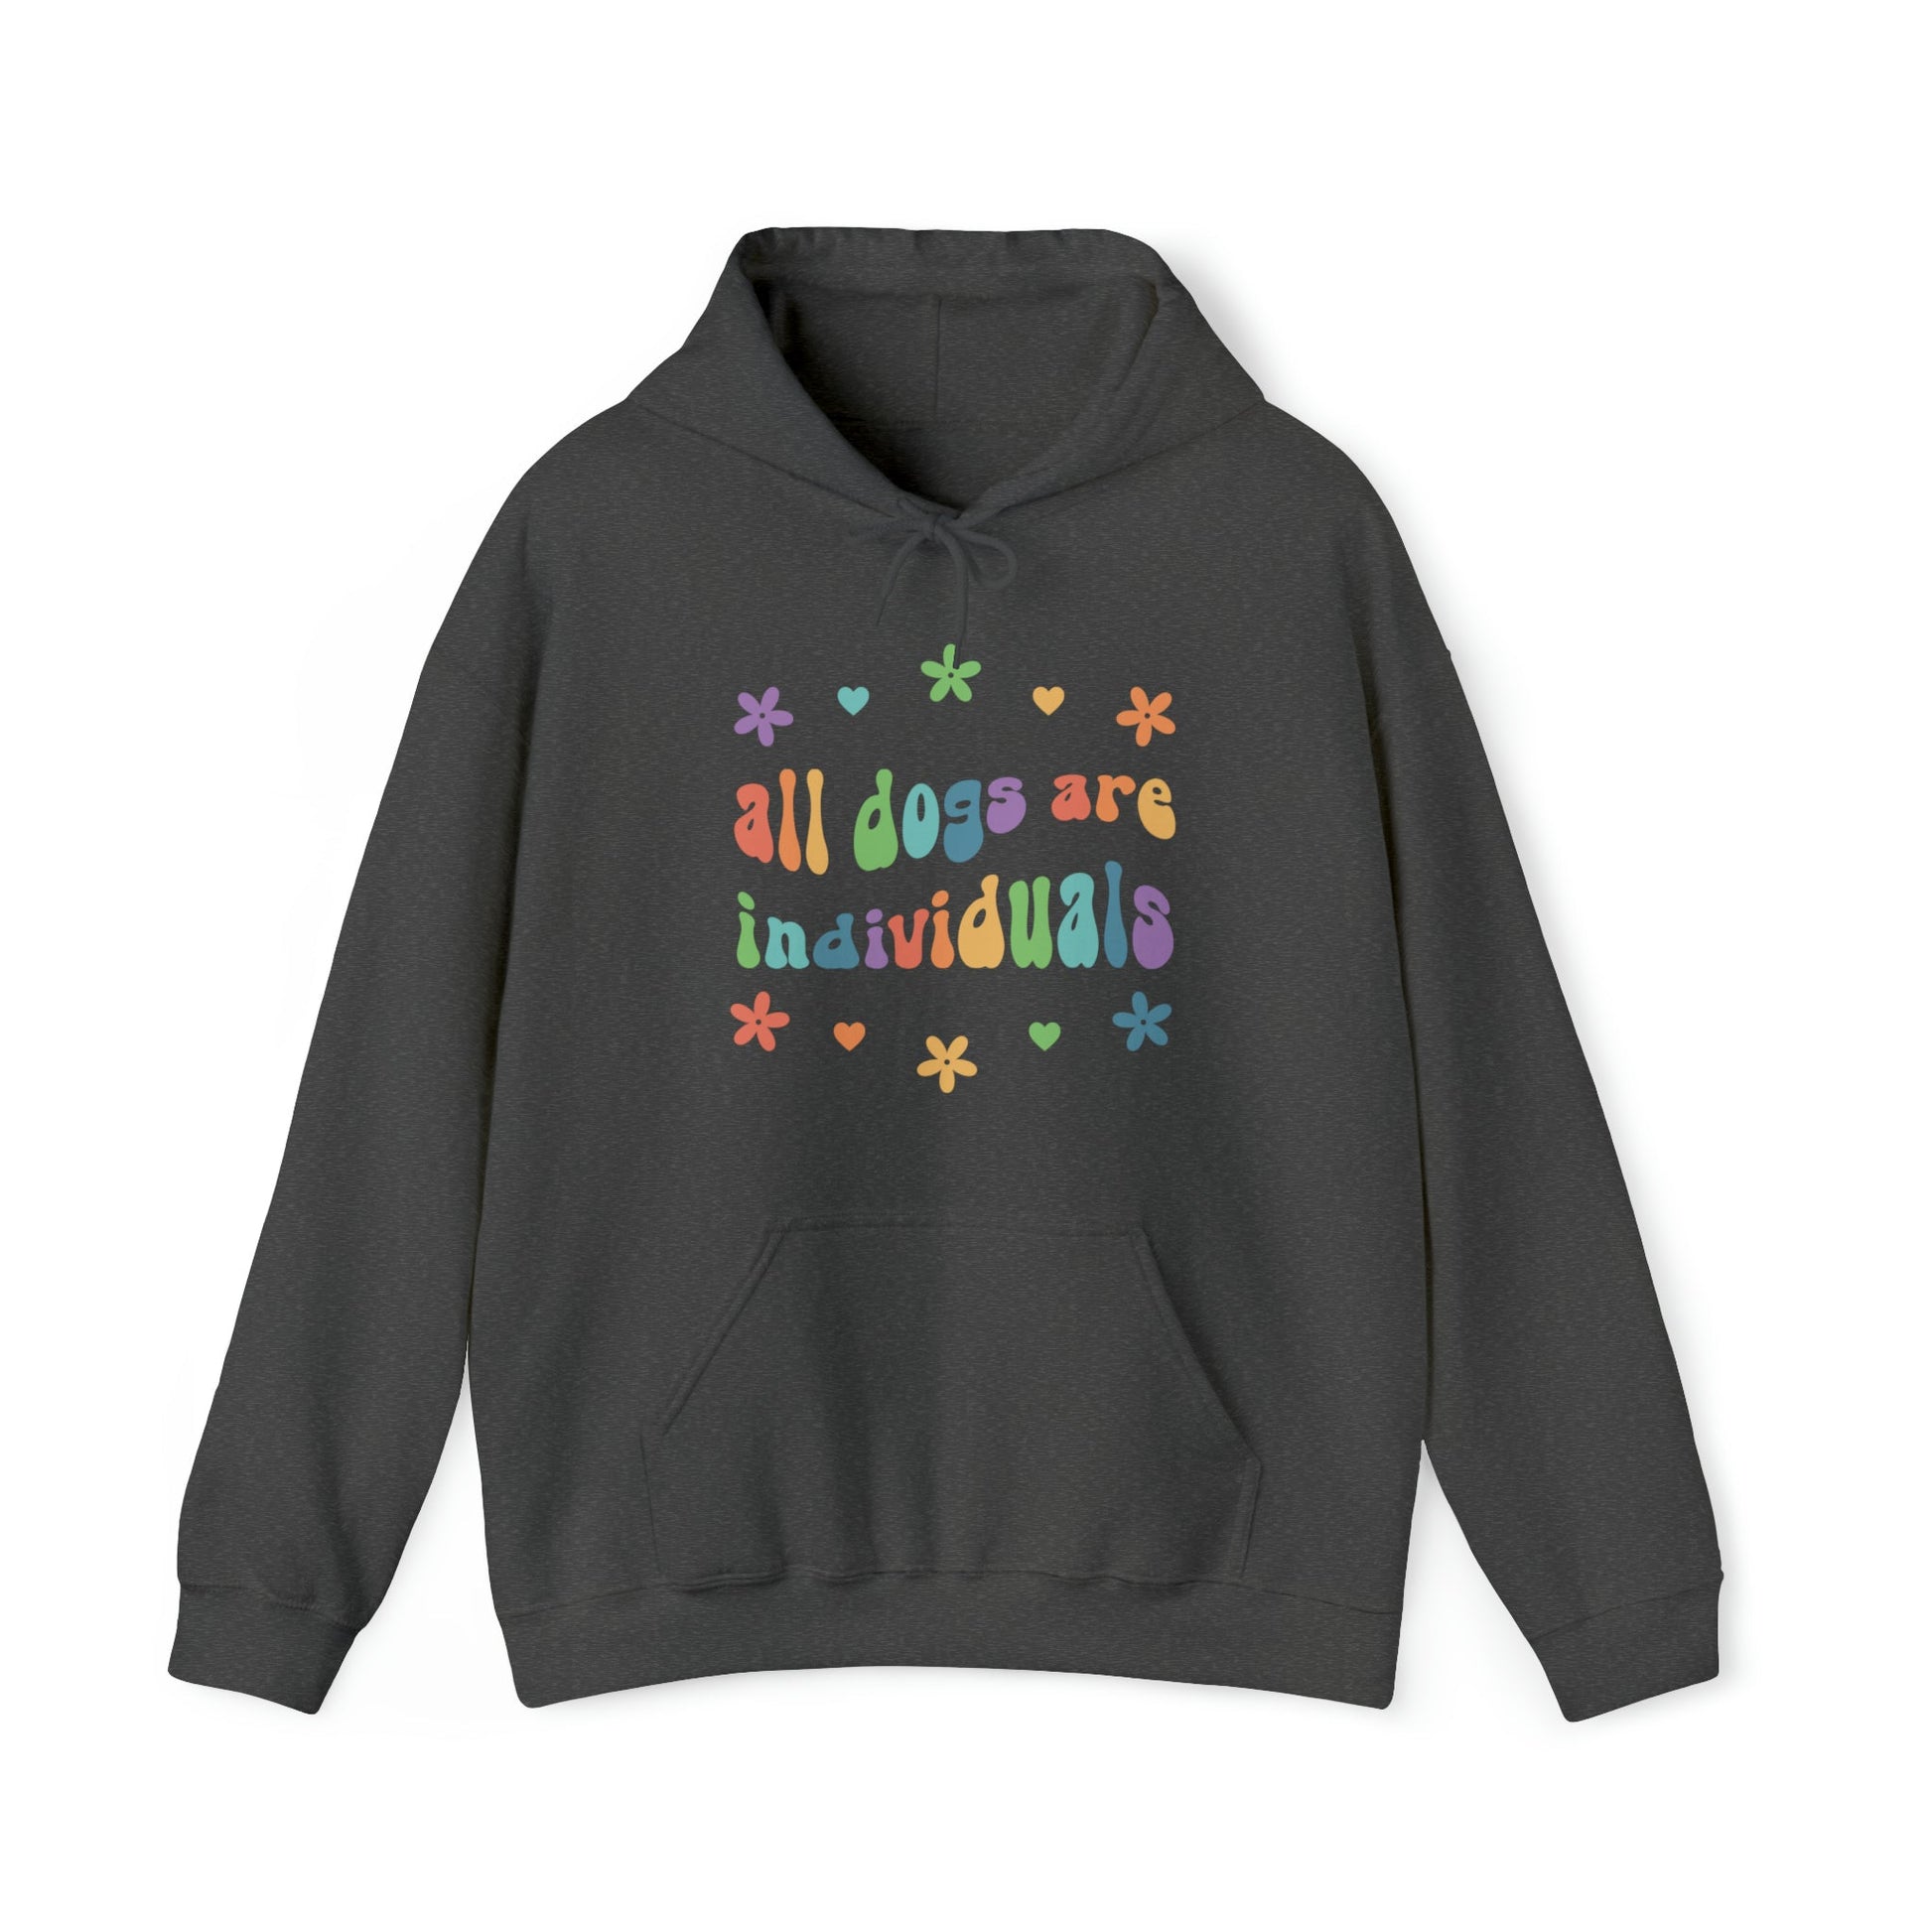 All Dogs are Individuals | Hooded Sweatshirt - Detezi Designs-32683465520149385627